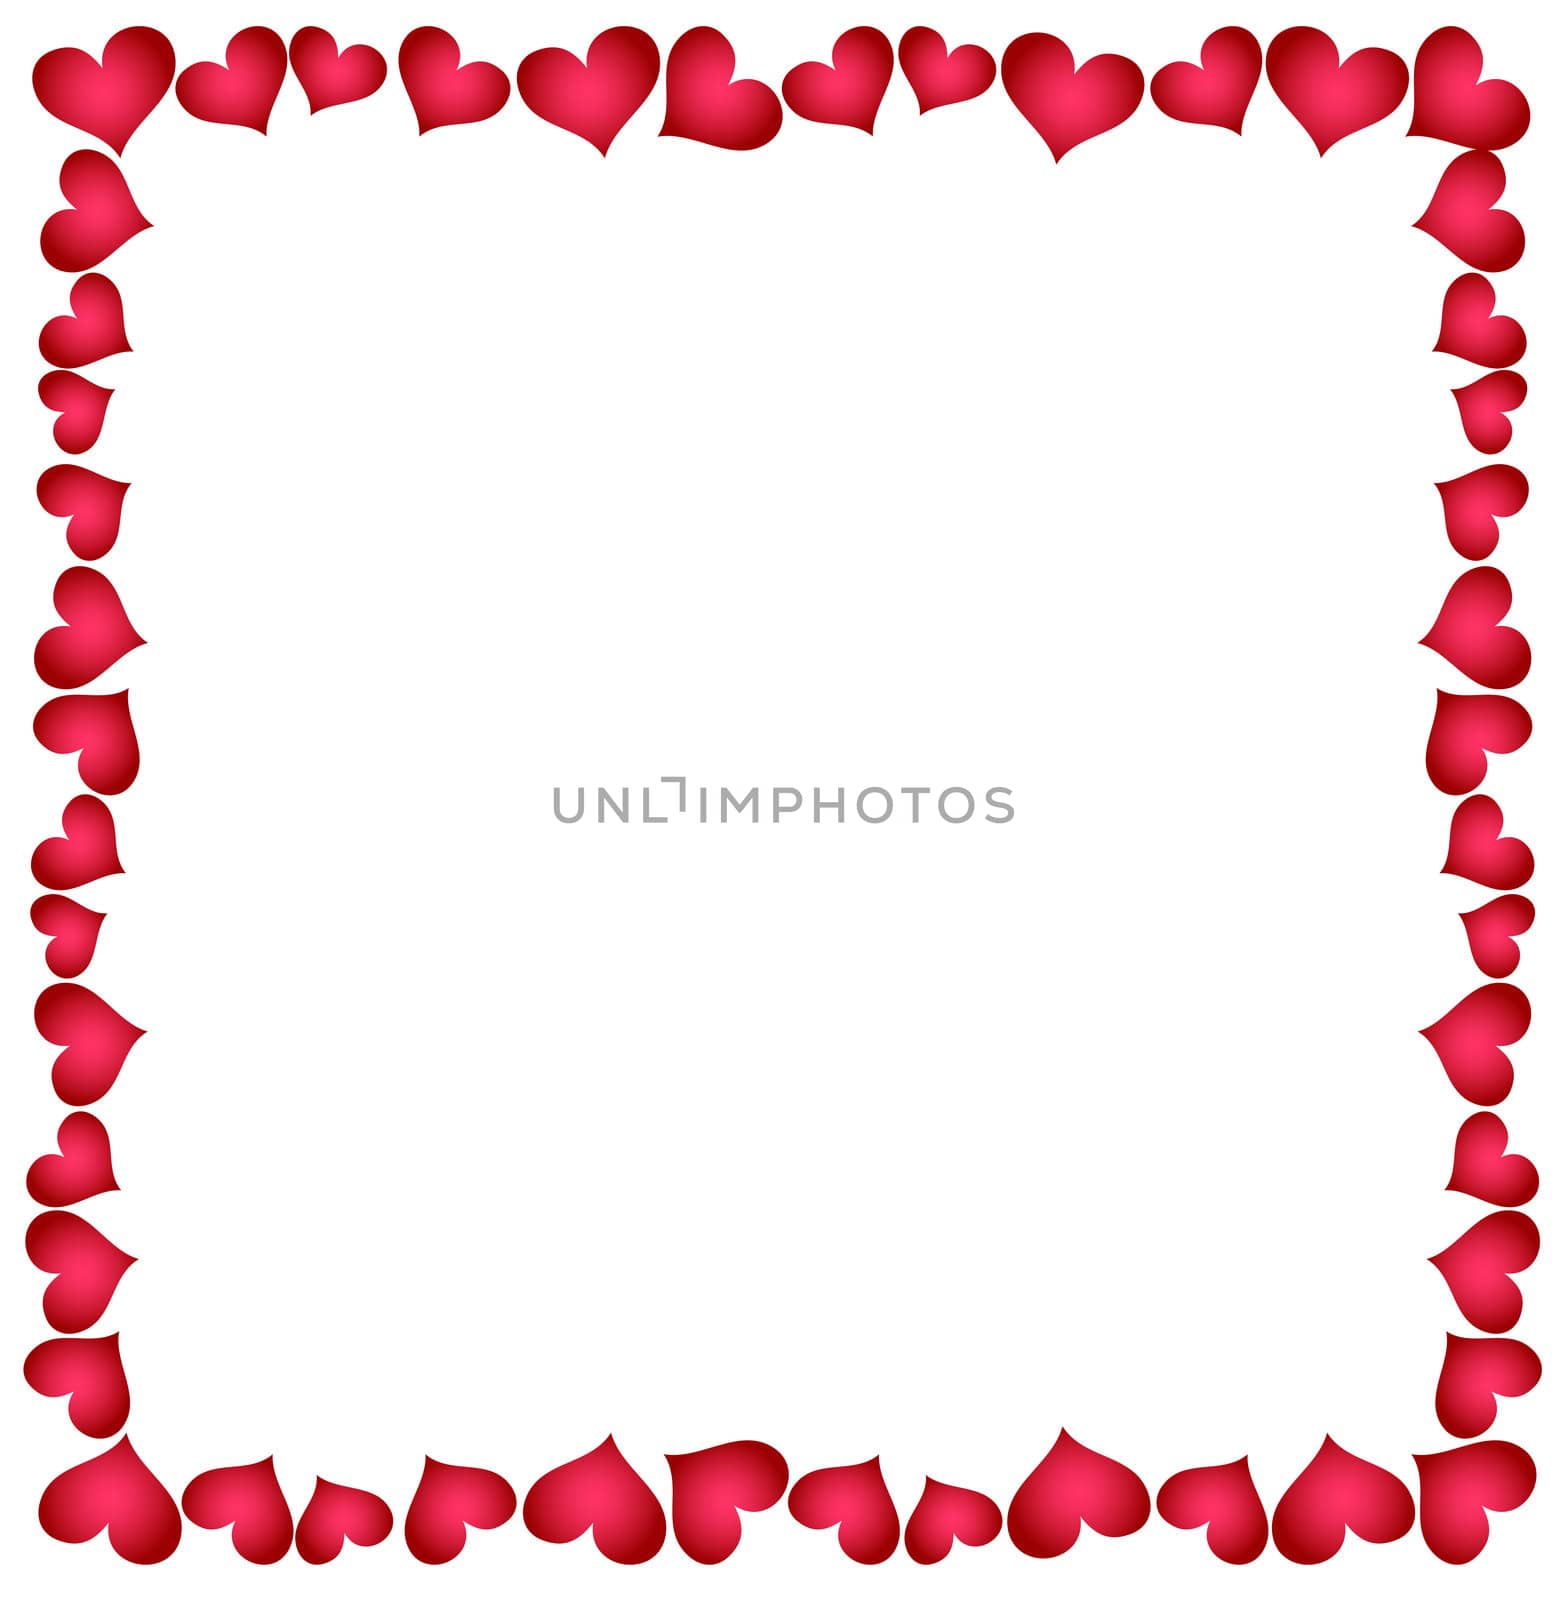 Heart Frame by peromarketing